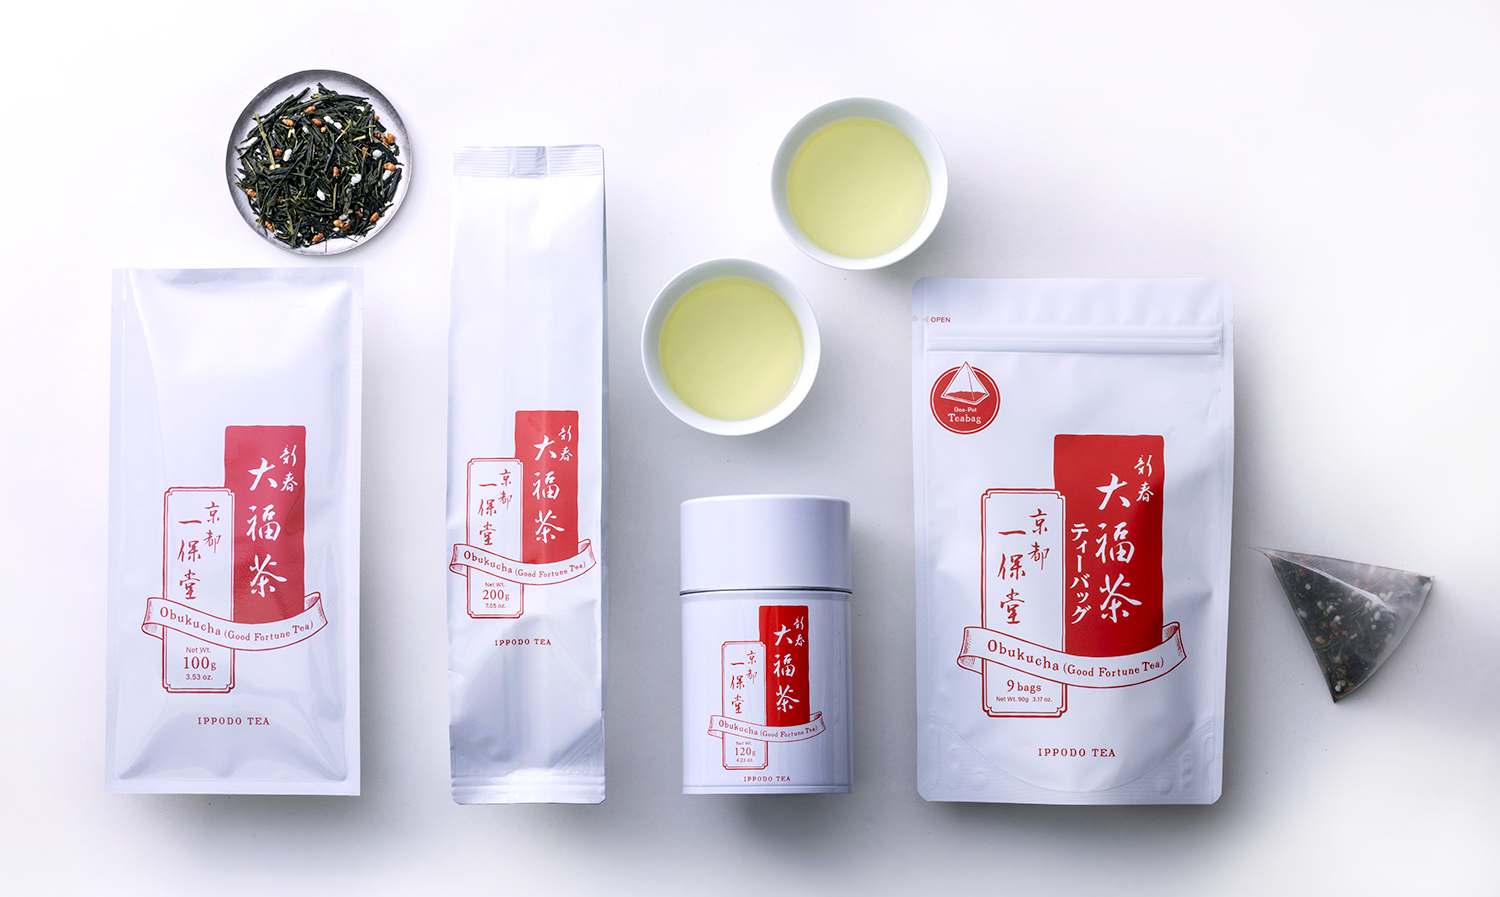 Now Available: Special genmaicha blend Obukucha